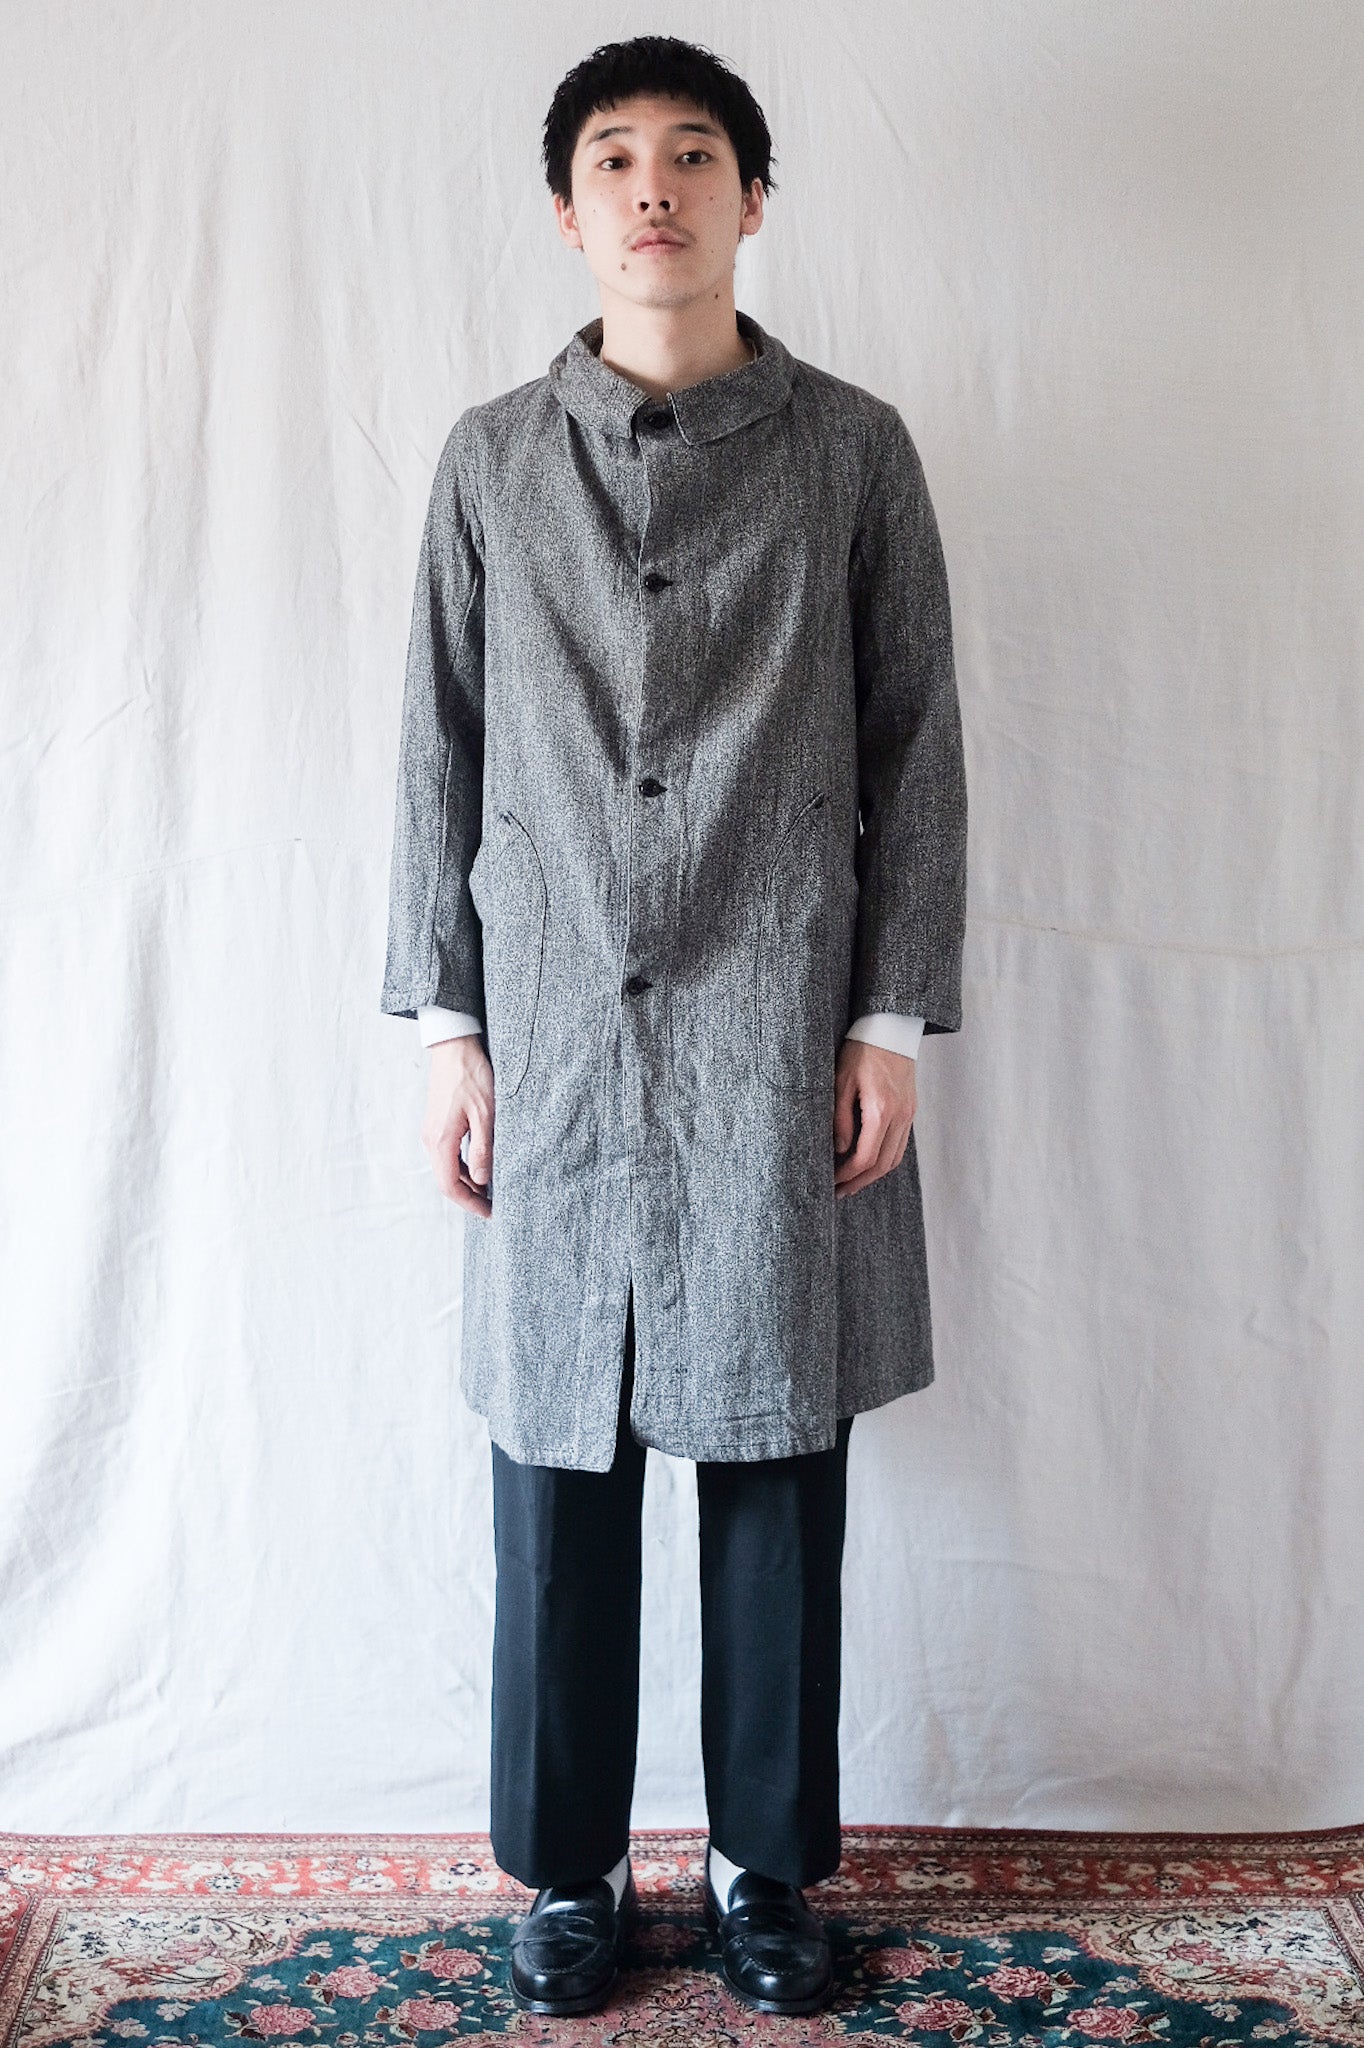 [~ 40's] French Vintage Black Chambray Work Coat